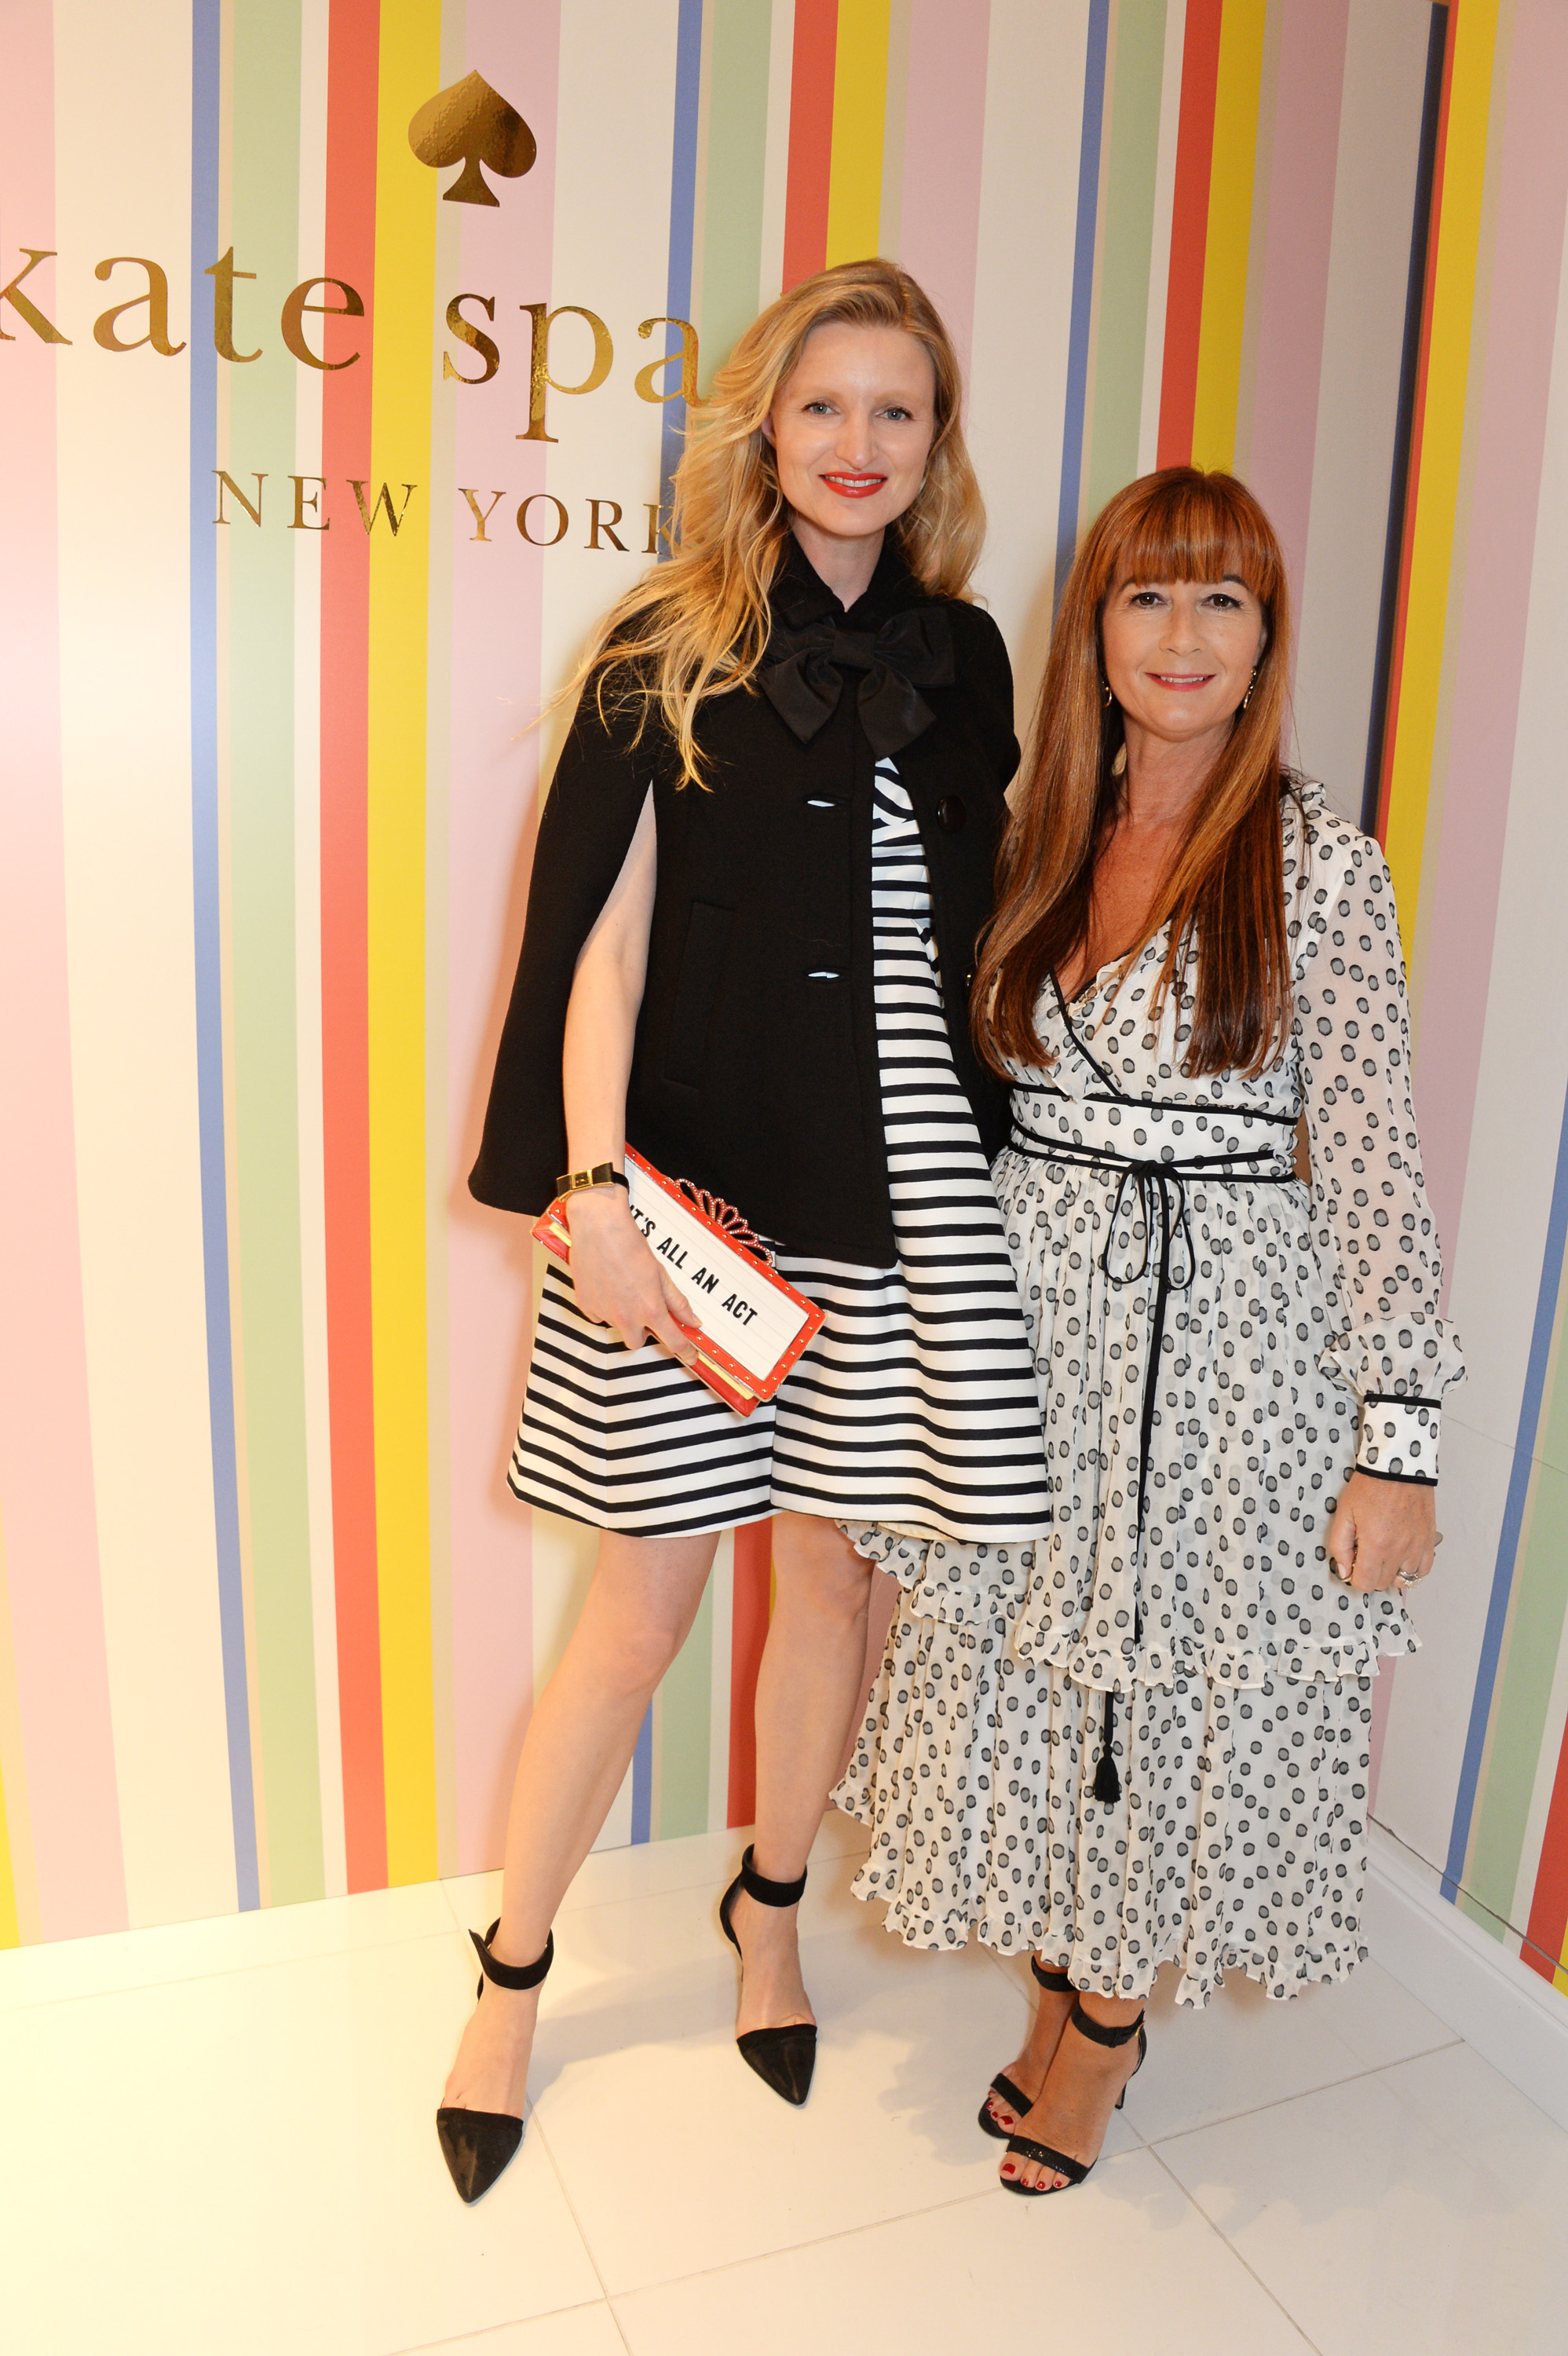 LONDON, ENGLAND - APRIL 21: Candice Lake (L) and Deborah Lloyd, Chief Creative Officer of Kate Spade & Company, attend the Kate Spade New York Regent Street store opening on April 21, 2016 in London, England. Photo Credit: Dave Benett